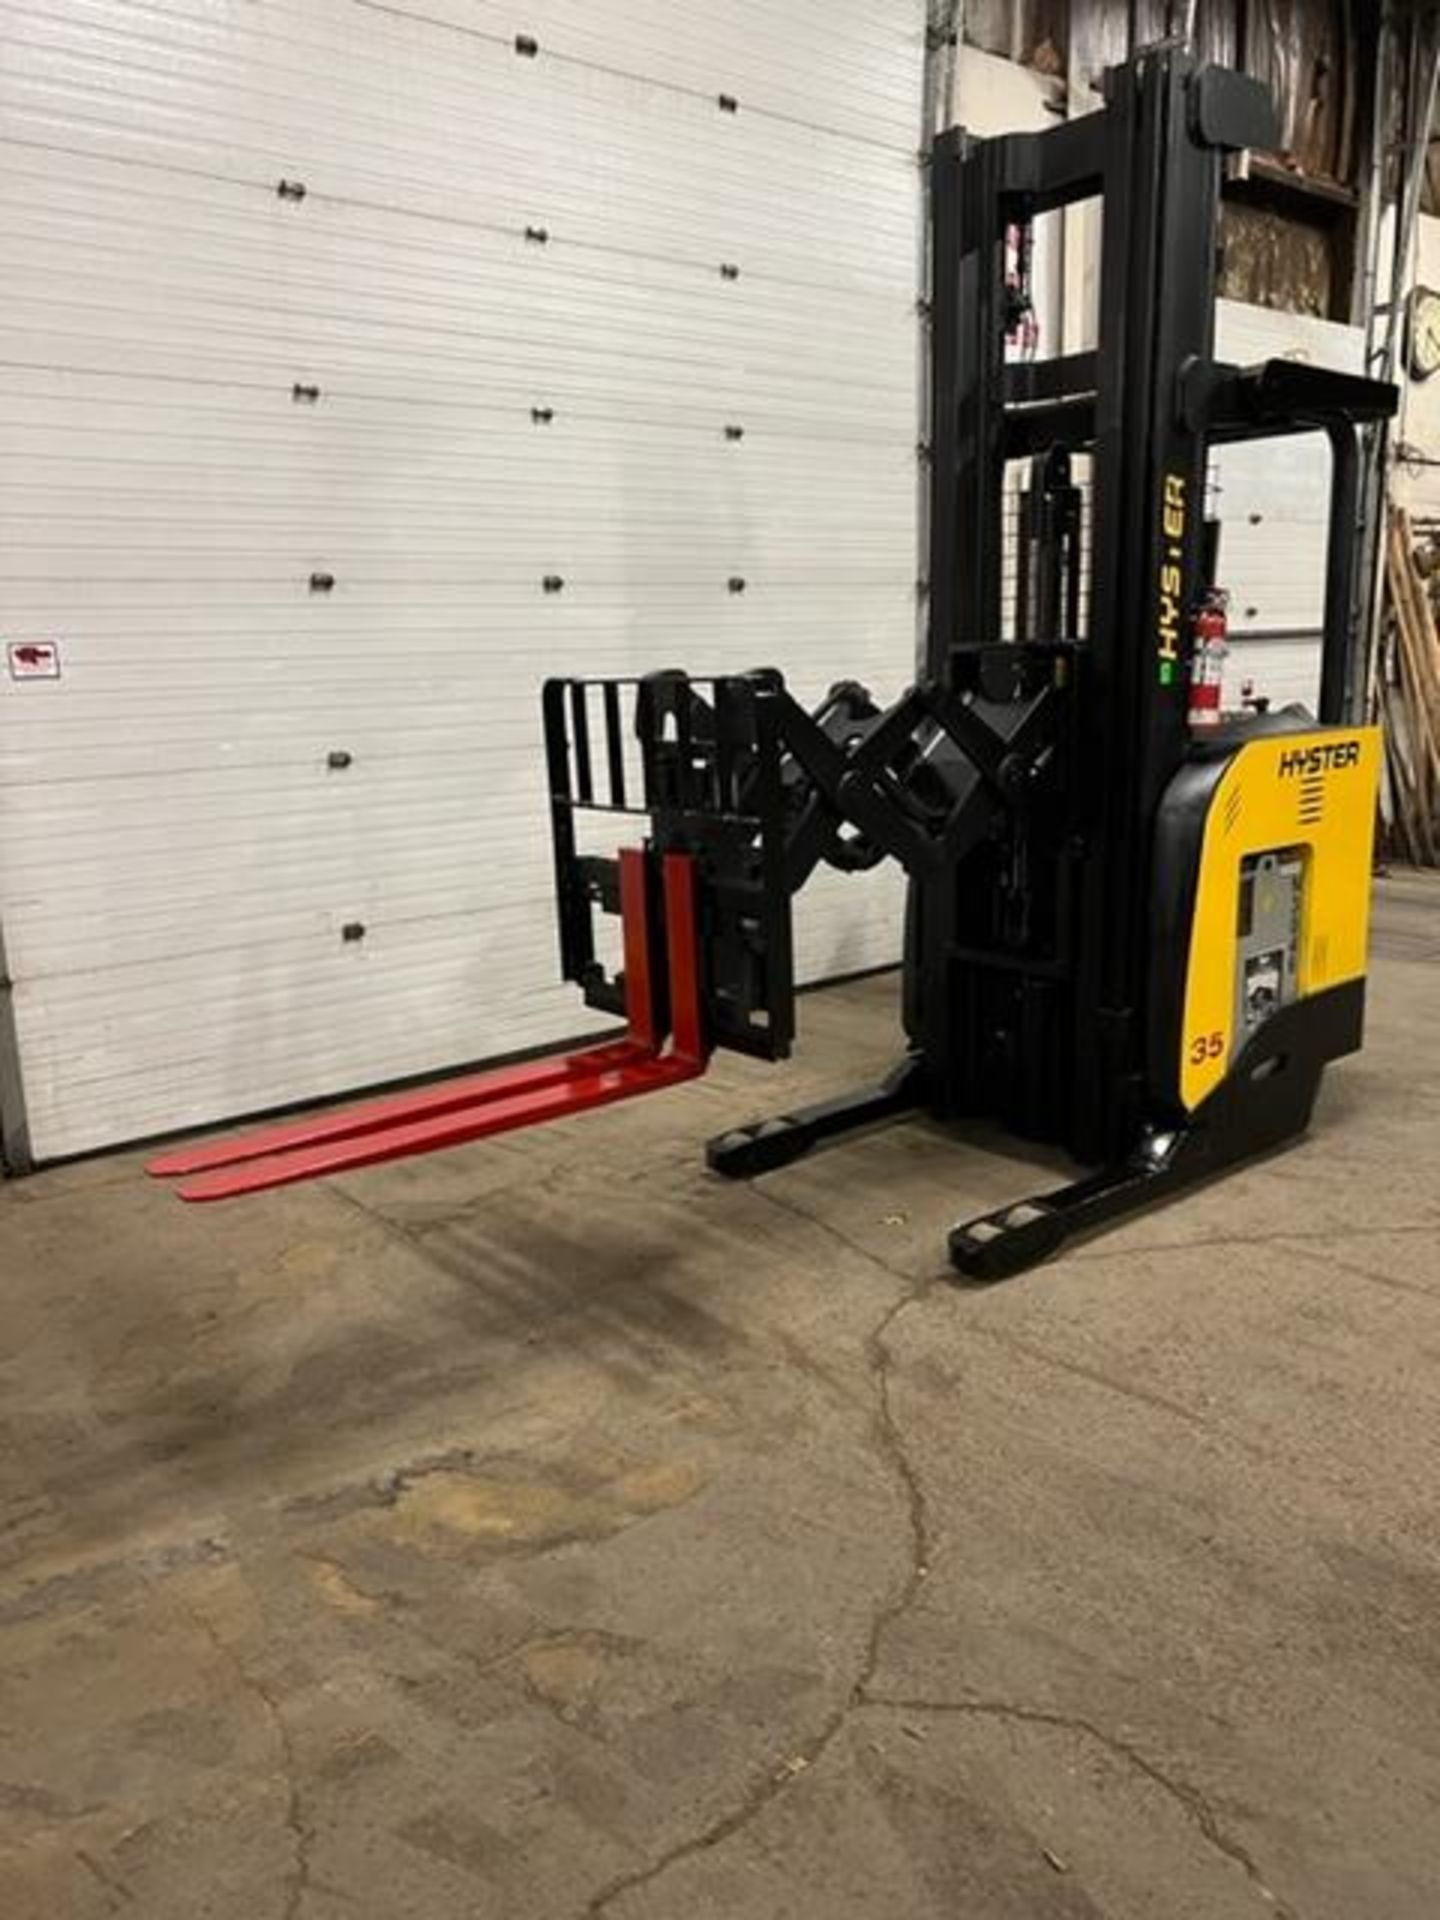 FREE CUSTOMS - 2015 Hyster 35 EXTRA Reach Truck Pallet Lifter 3500lbs capacity electric MINT machine - Image 2 of 3